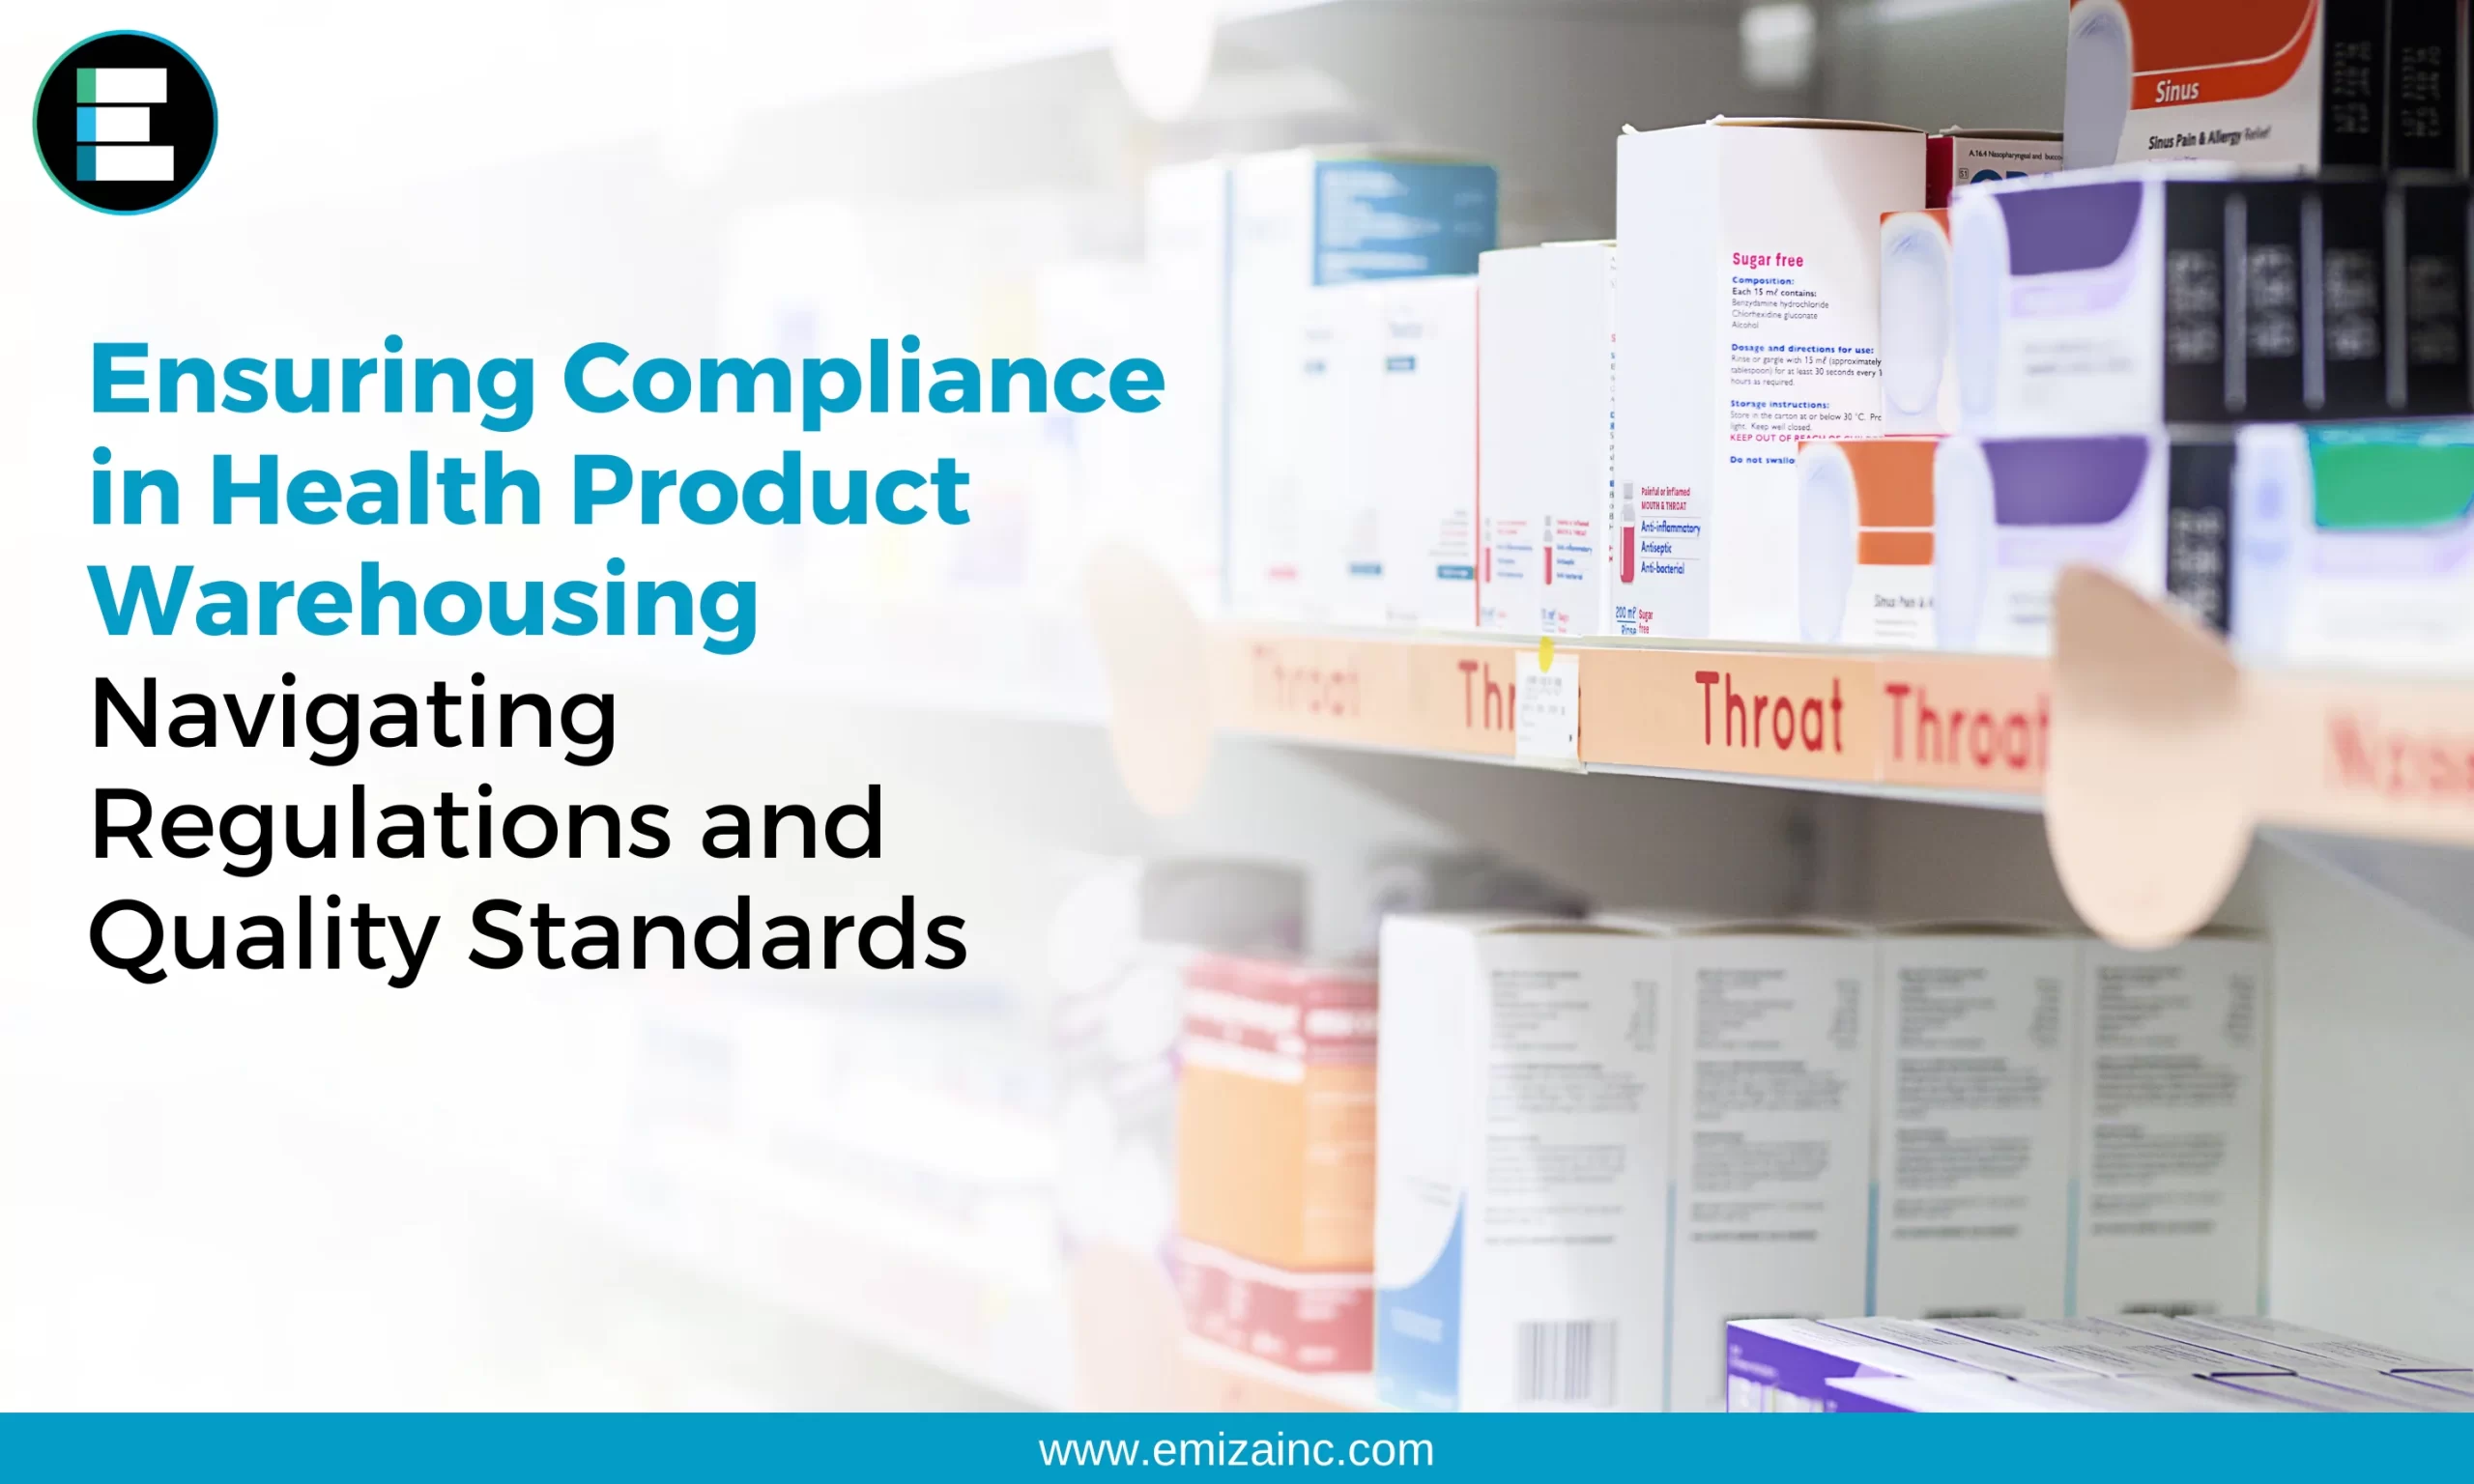 Ensuring Compliance in Health Product Warehousing Navigating Regulations and Quality Standards